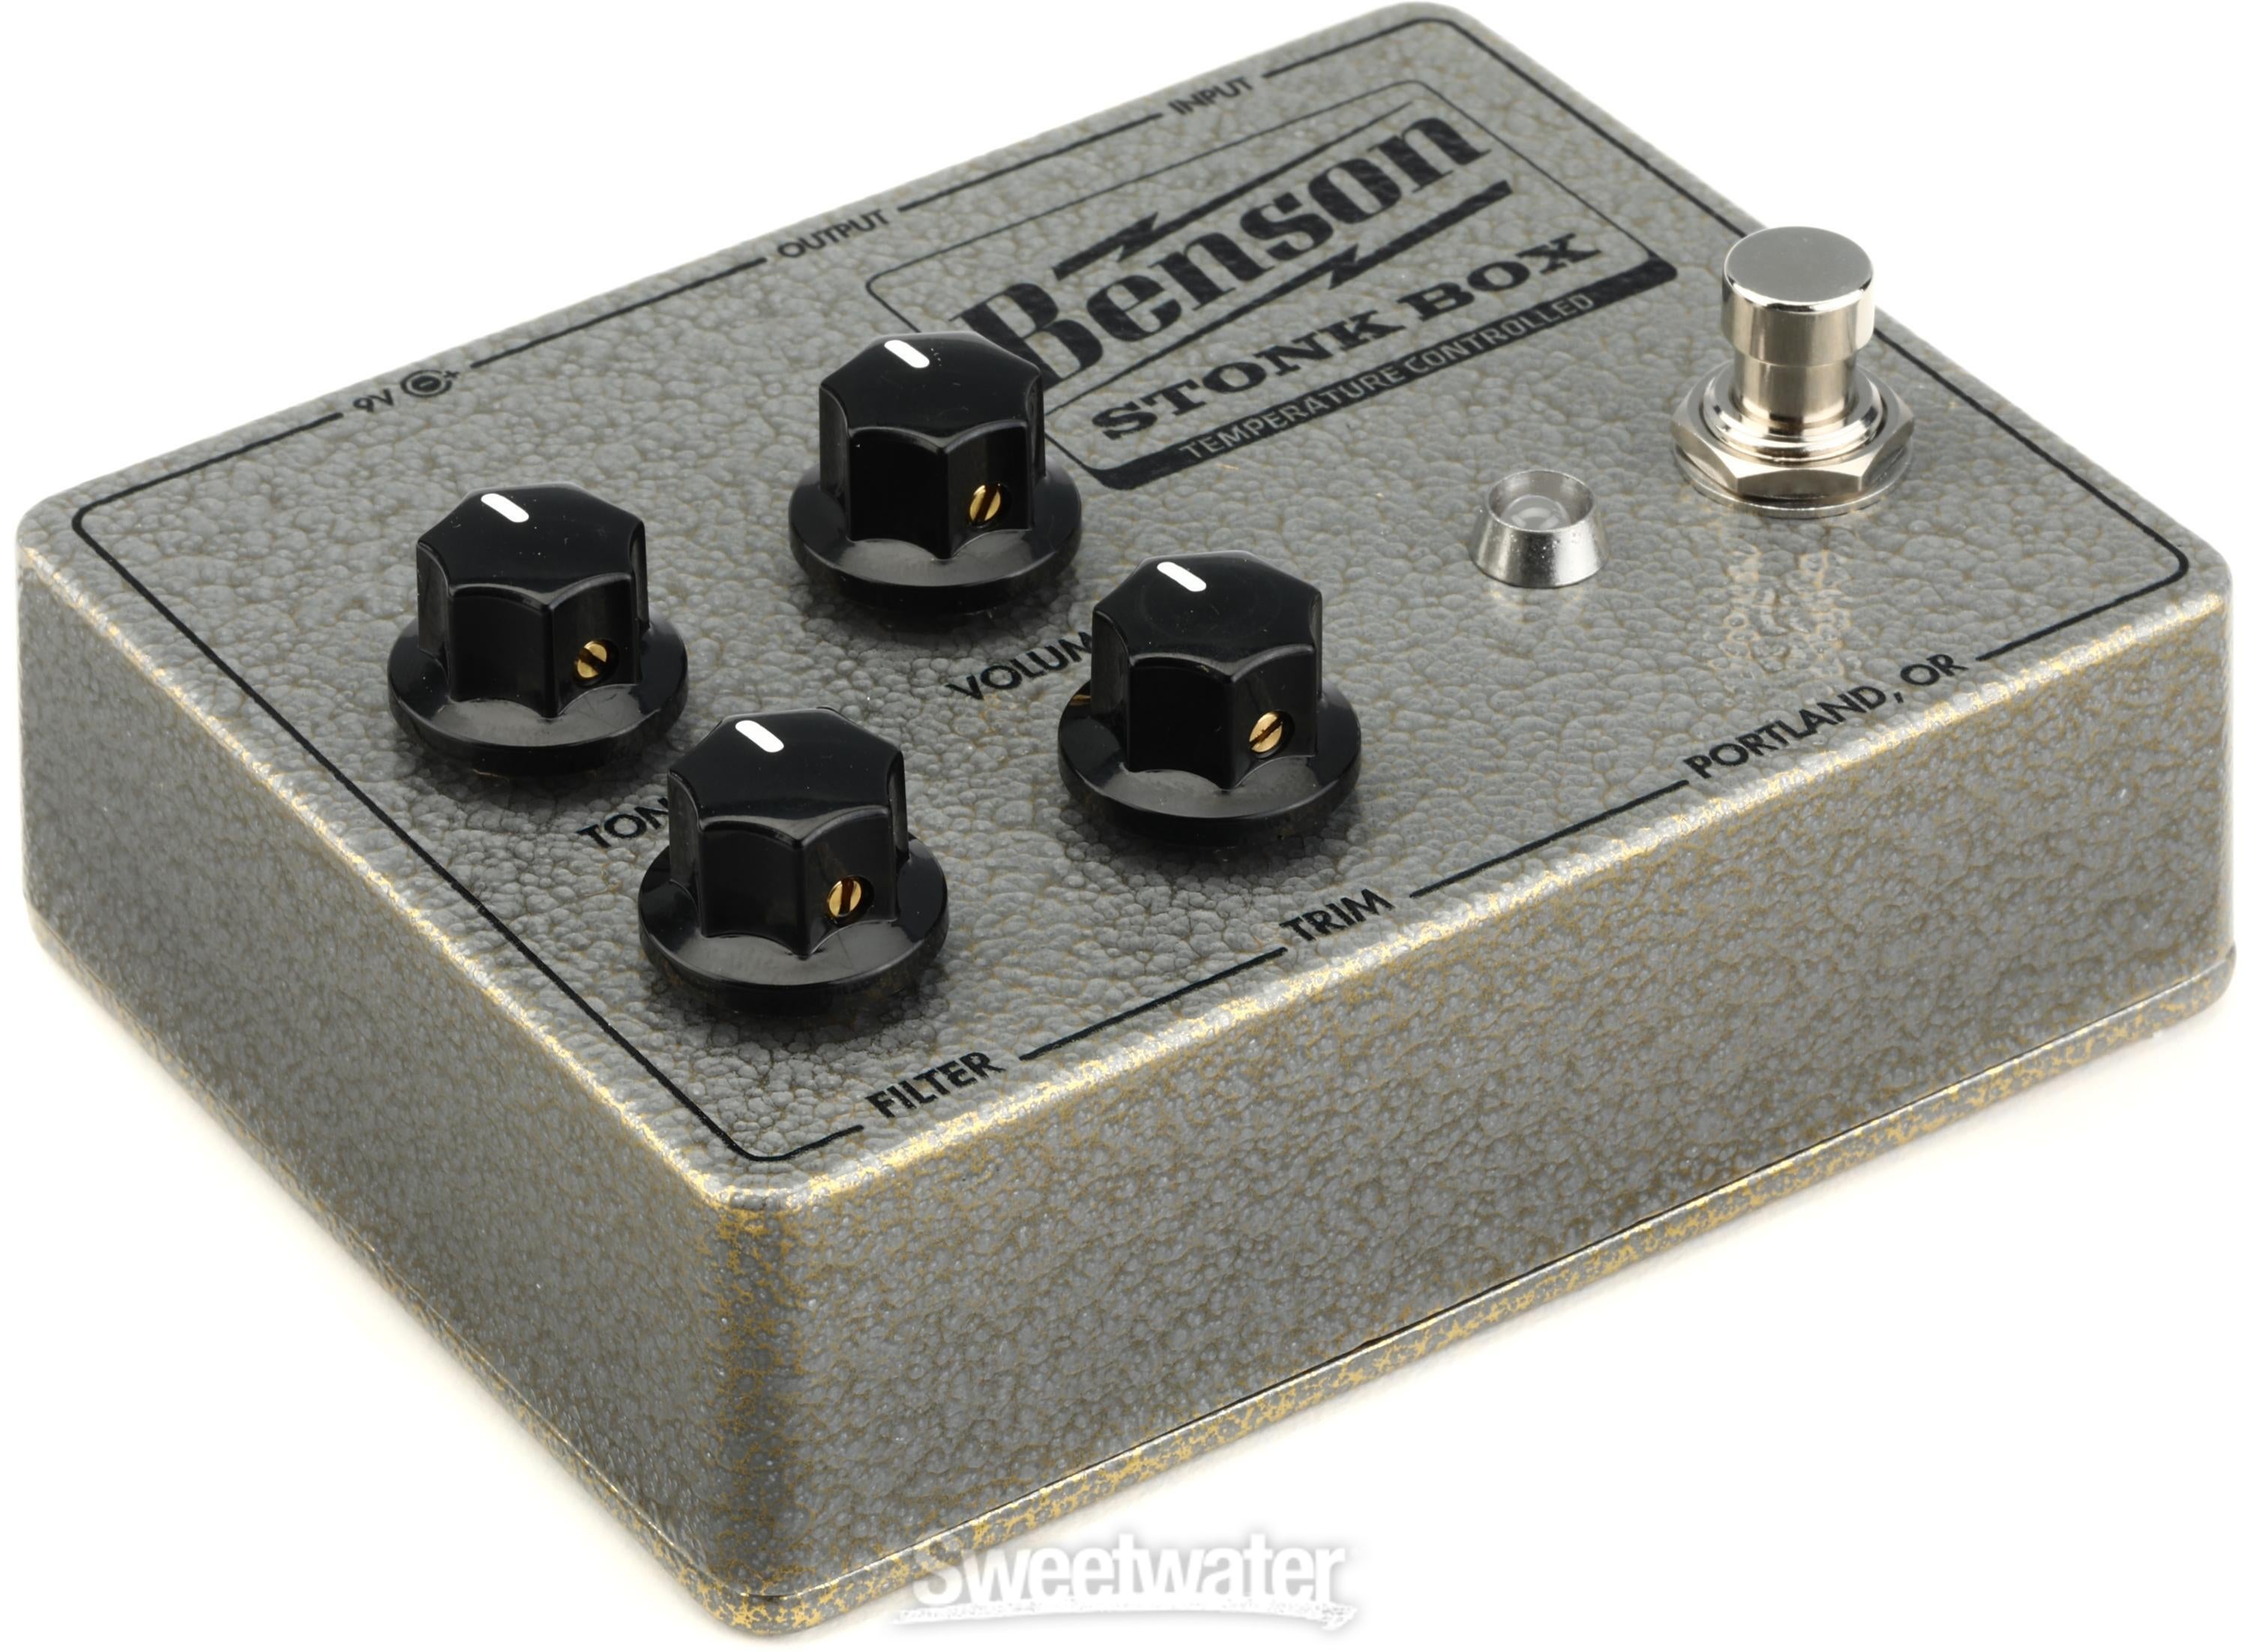 Benson Amps Stonk Box Temperature-controlled Fuzz Pedal Reviews 